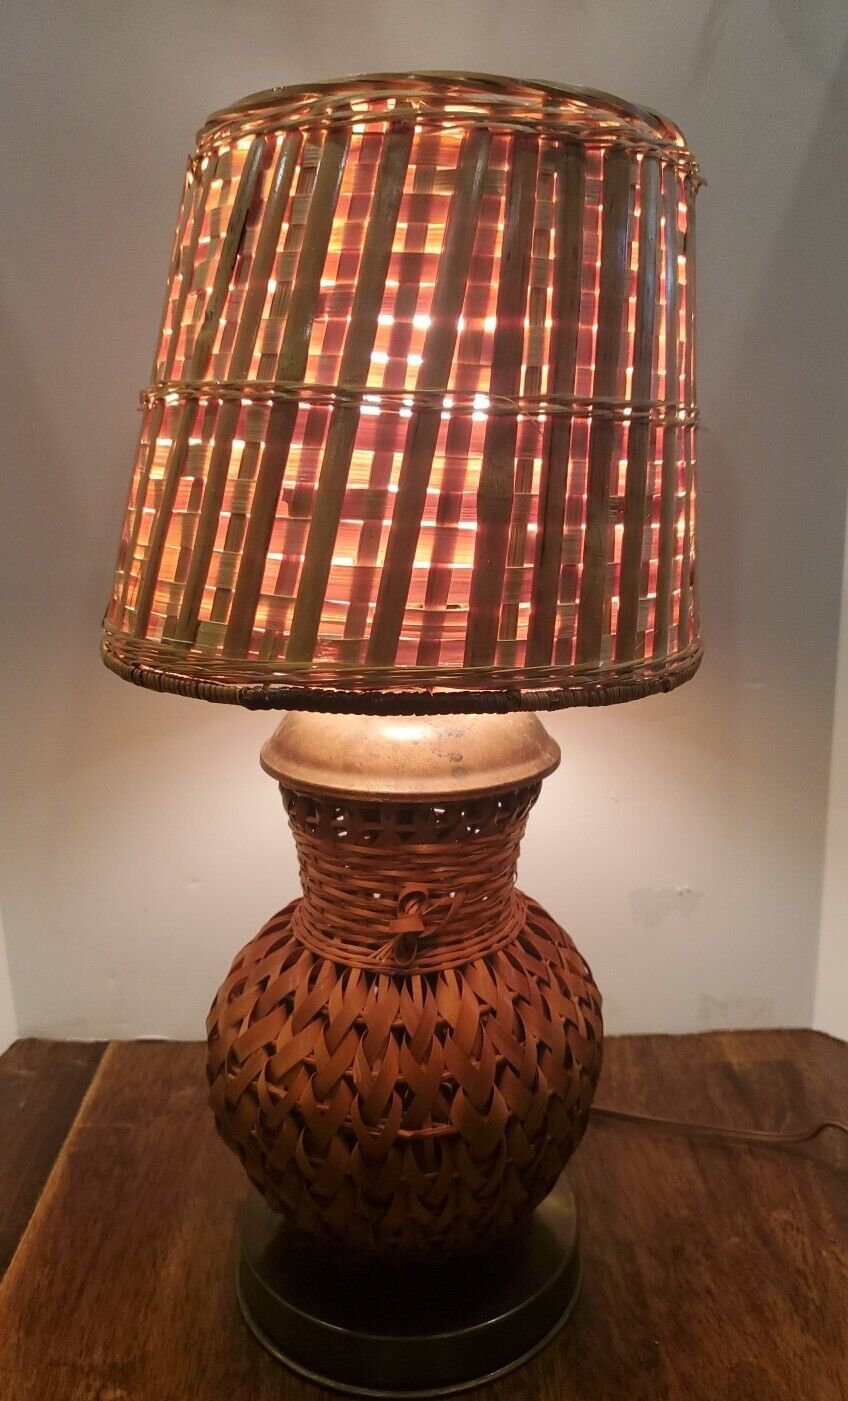 Vintage 1970s Rattan Wicker Table Lamp with Shade Brass Accents 20in  WORKS